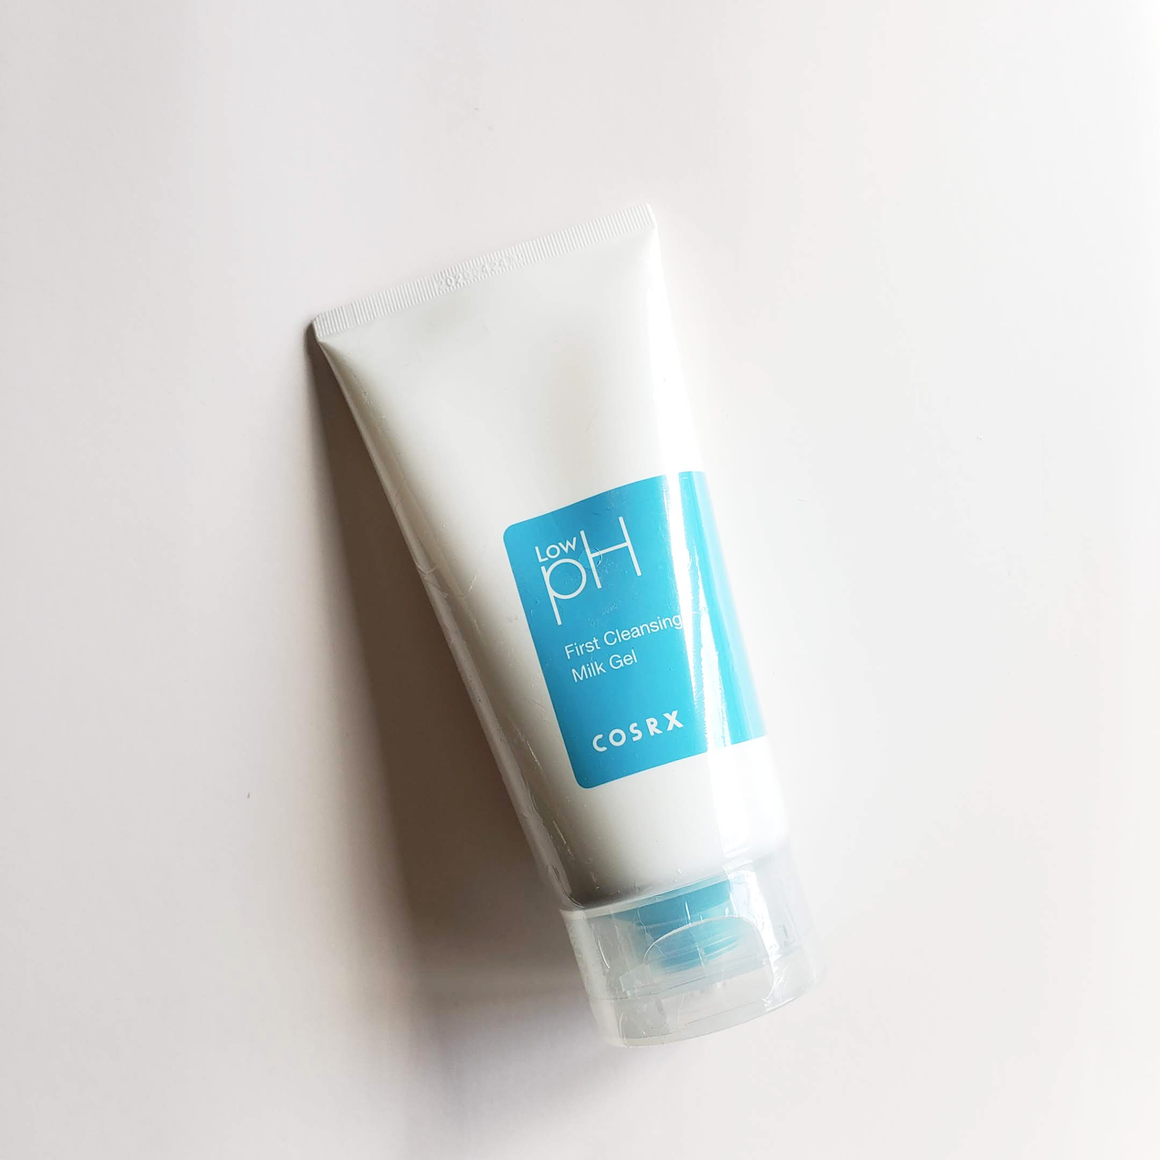 COSRX Low pH First Cleansing Milk Gel [EXP 04.16.2020]